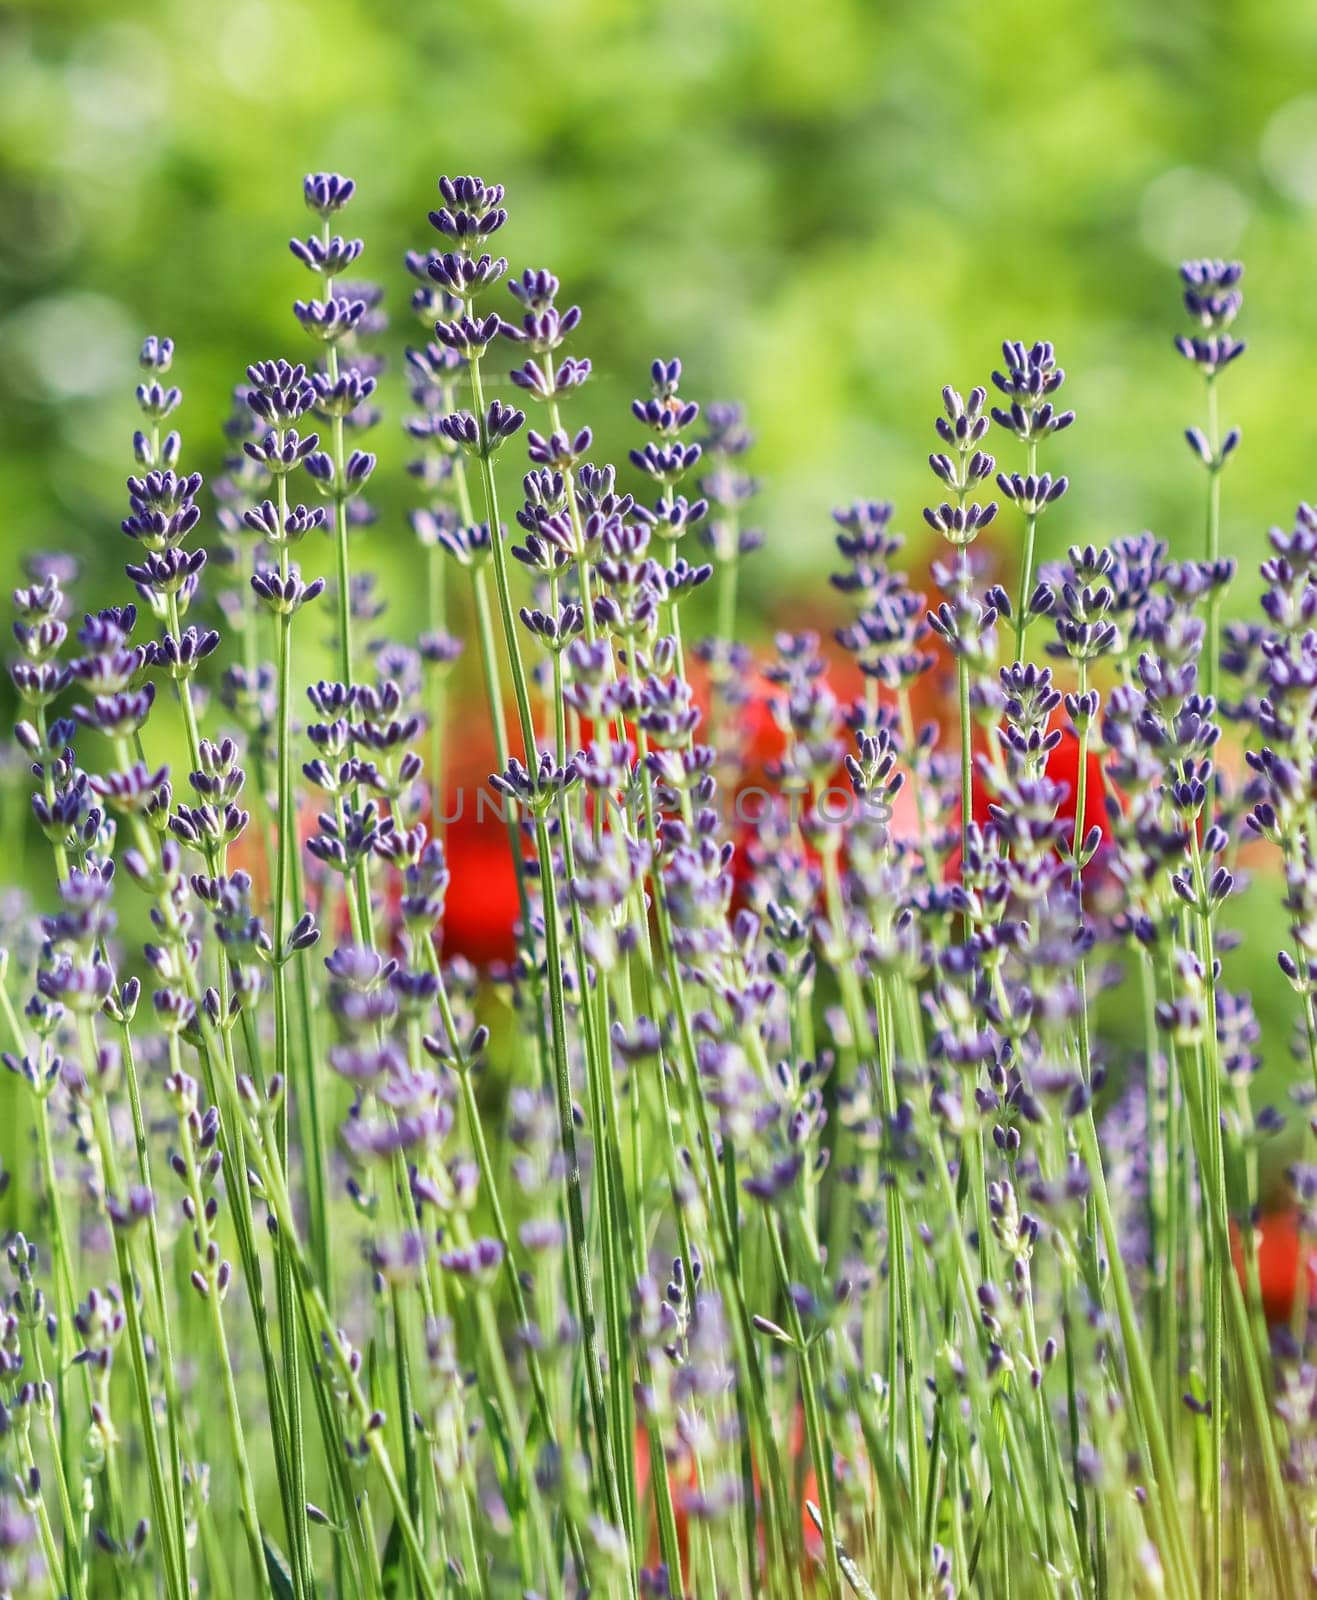 Lavender flowers blooming in the garden with blurred background on a summer day